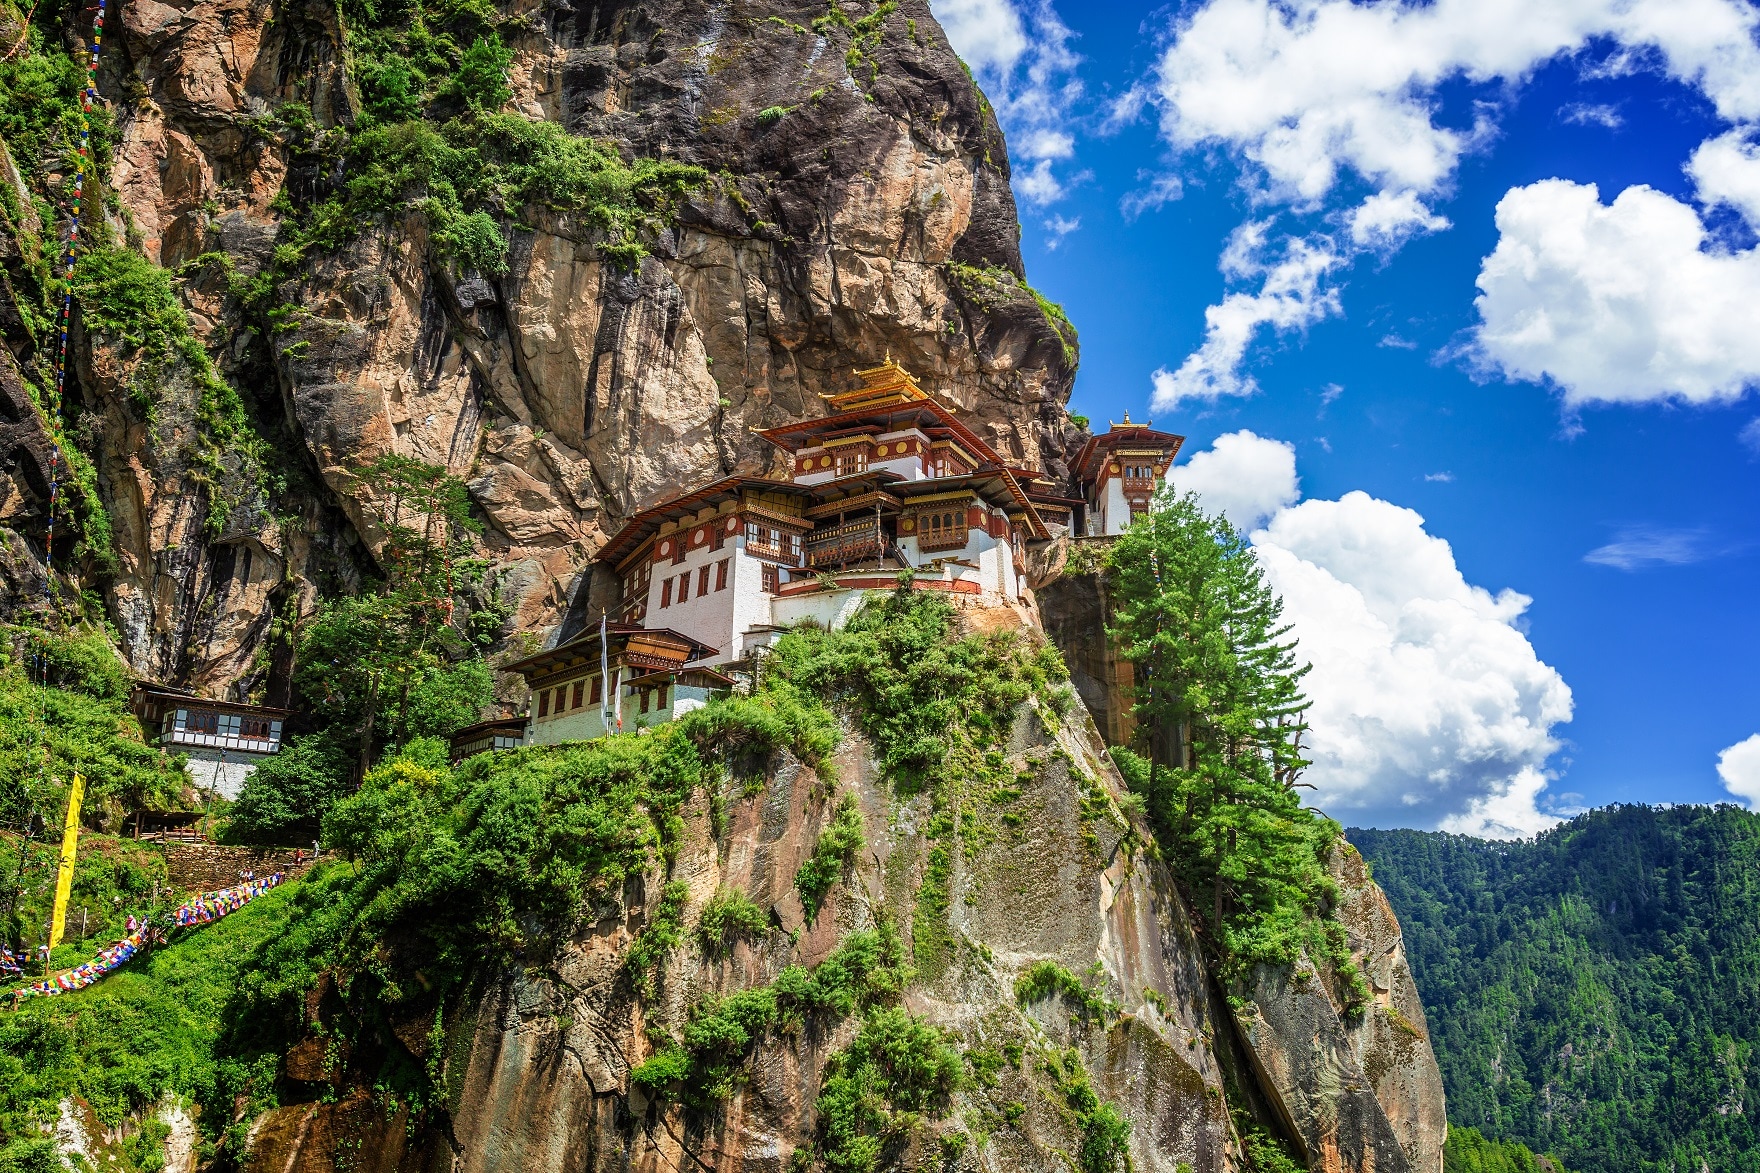  A Wonderful Hike to Tiger’s Nest Monastery 